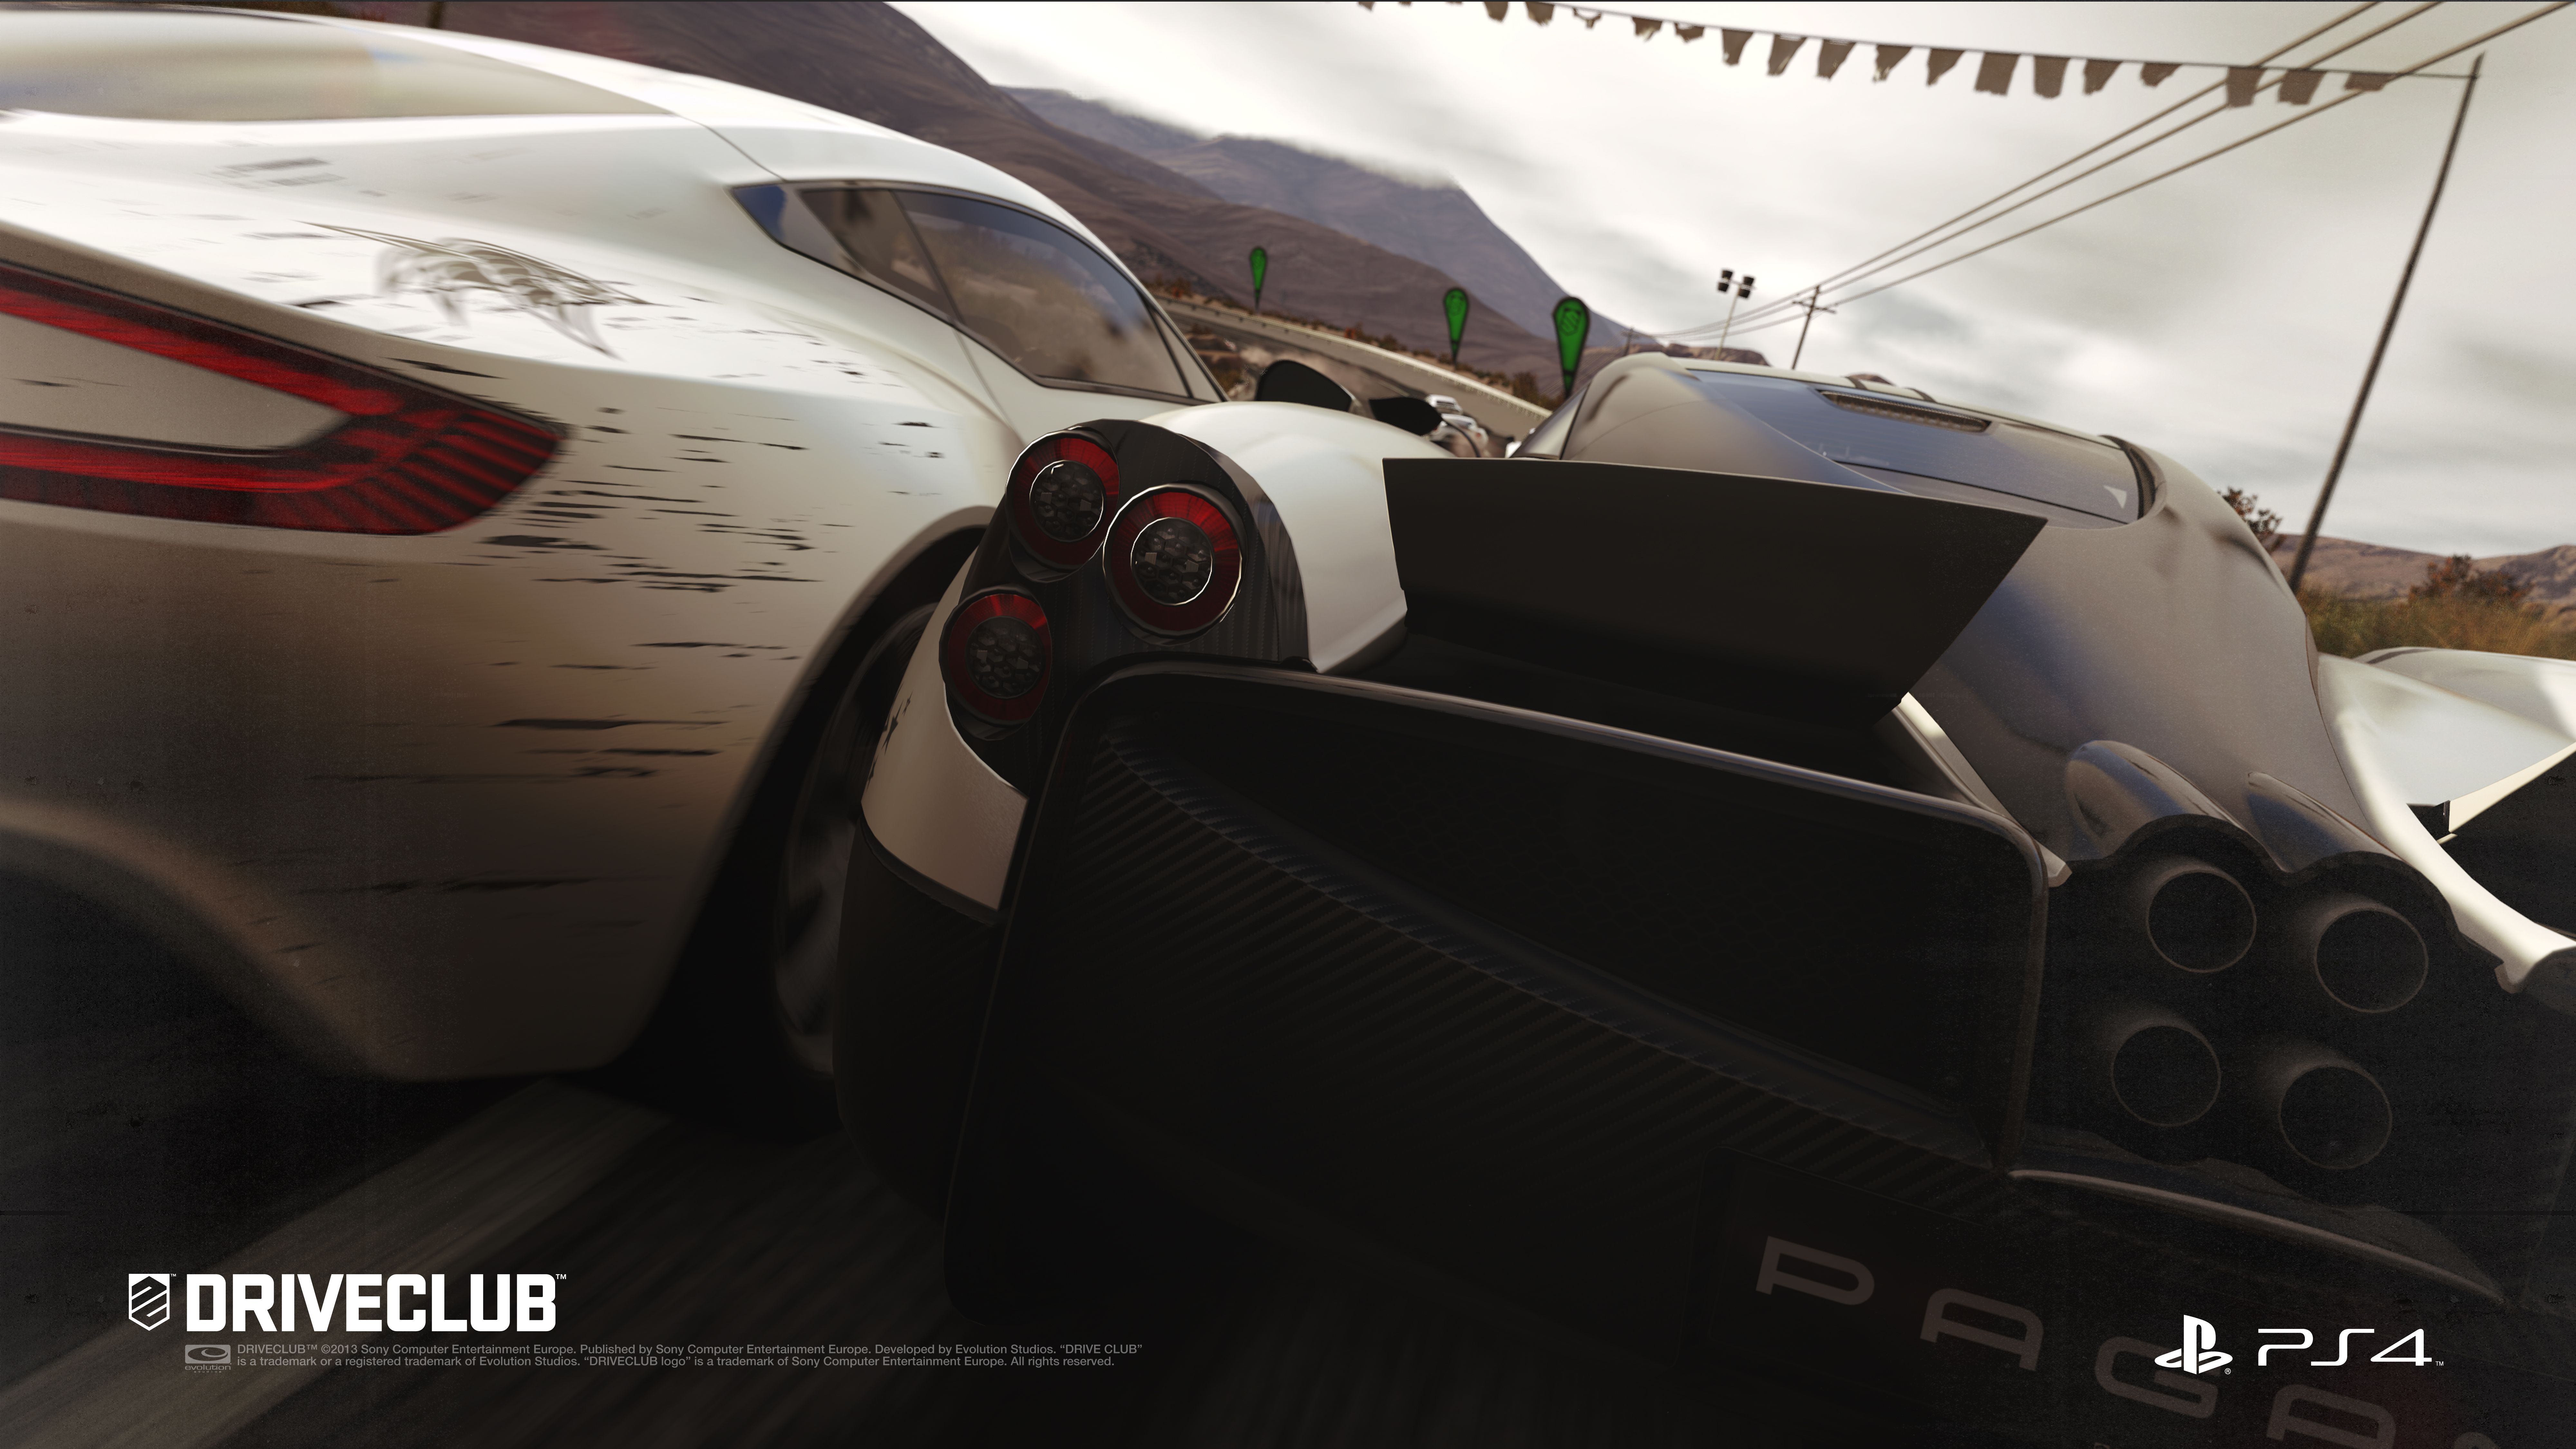 driveclub review image 5